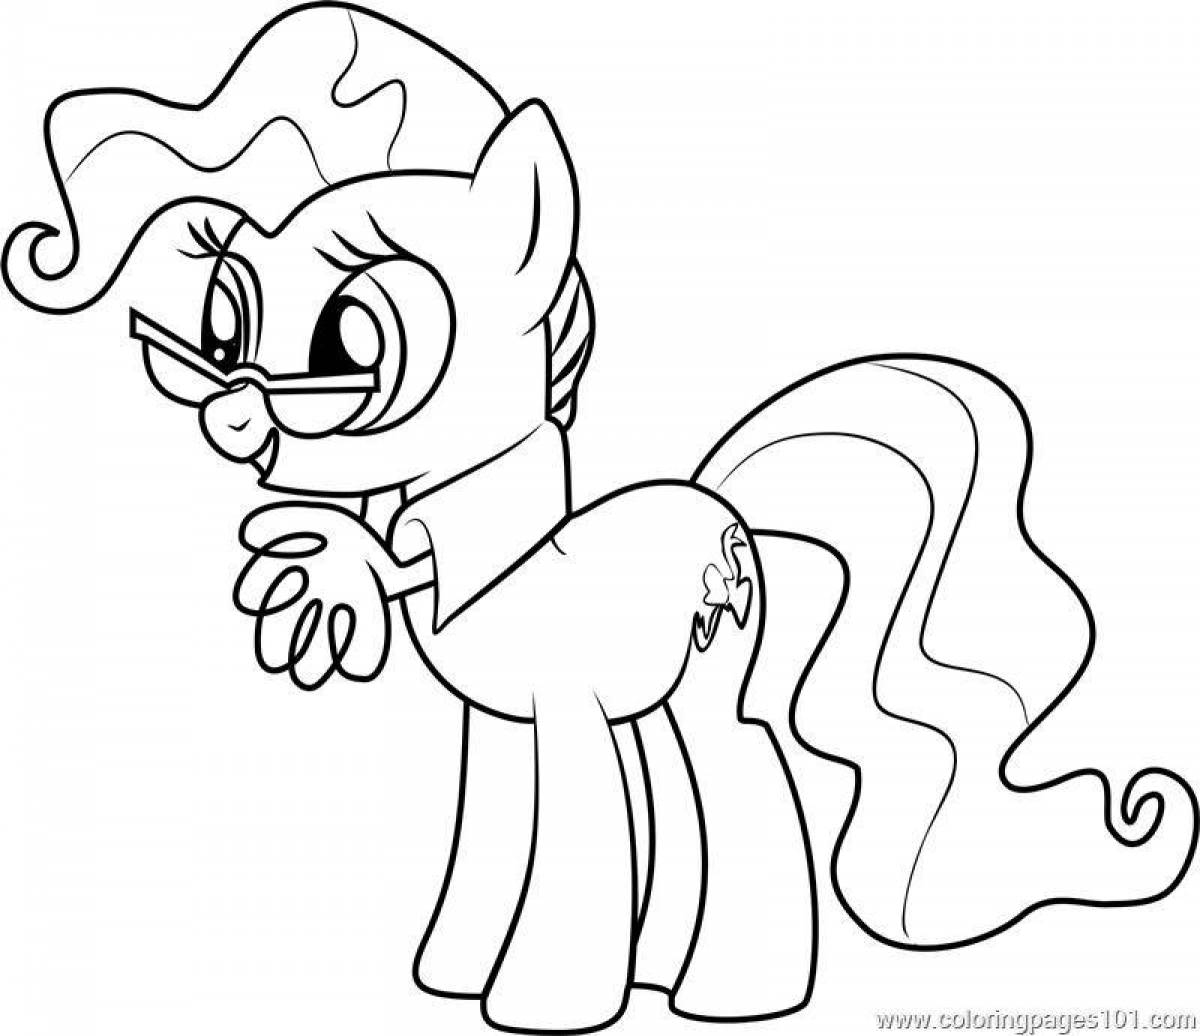 Coloring page glowing pony life